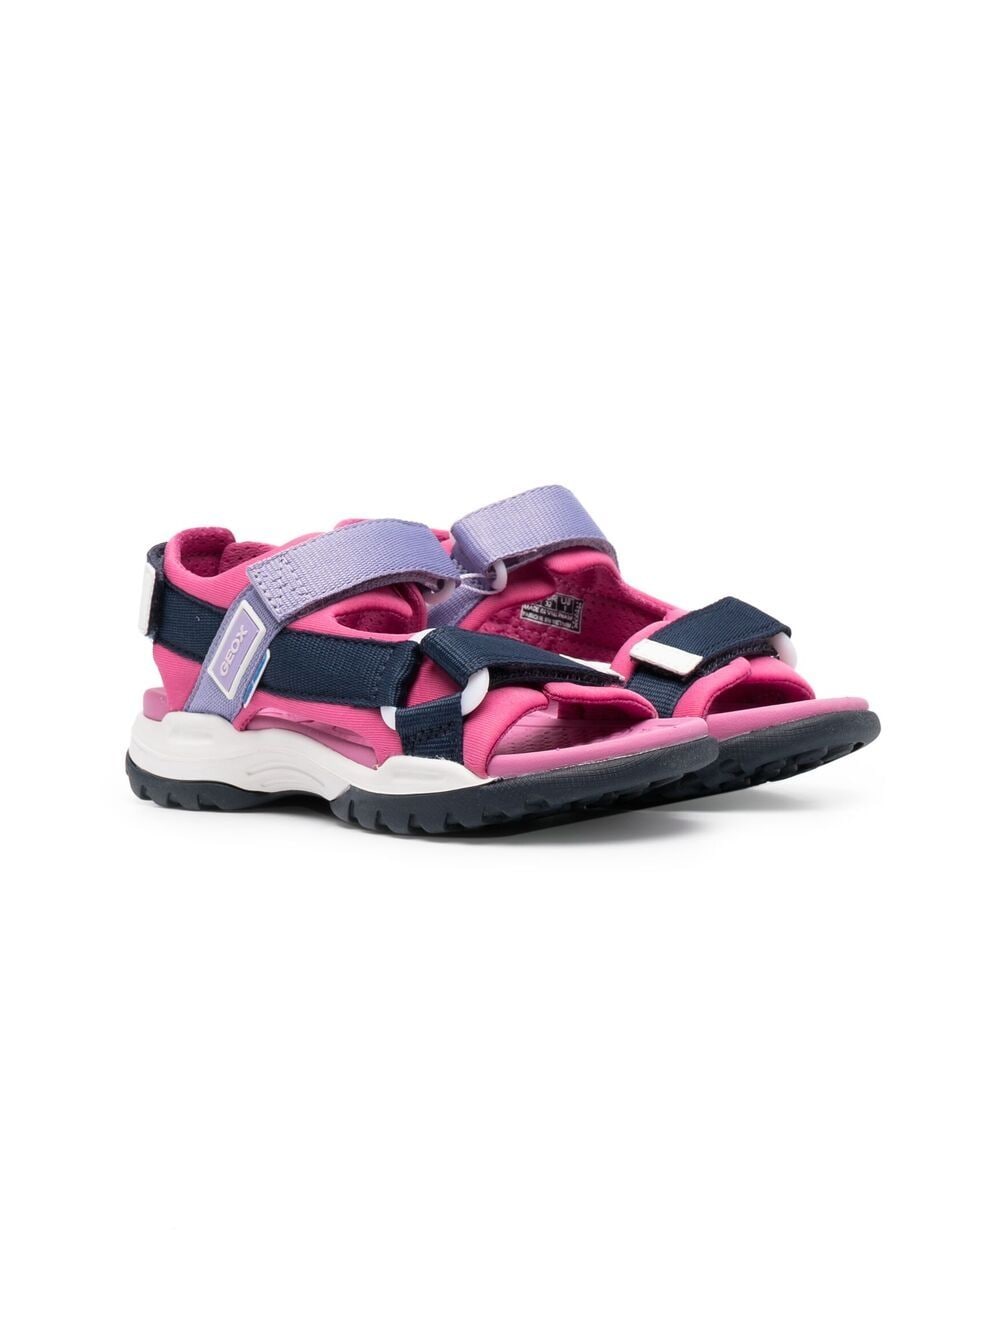 Geox Kids' Borealis Colour-block Sandals In Pink